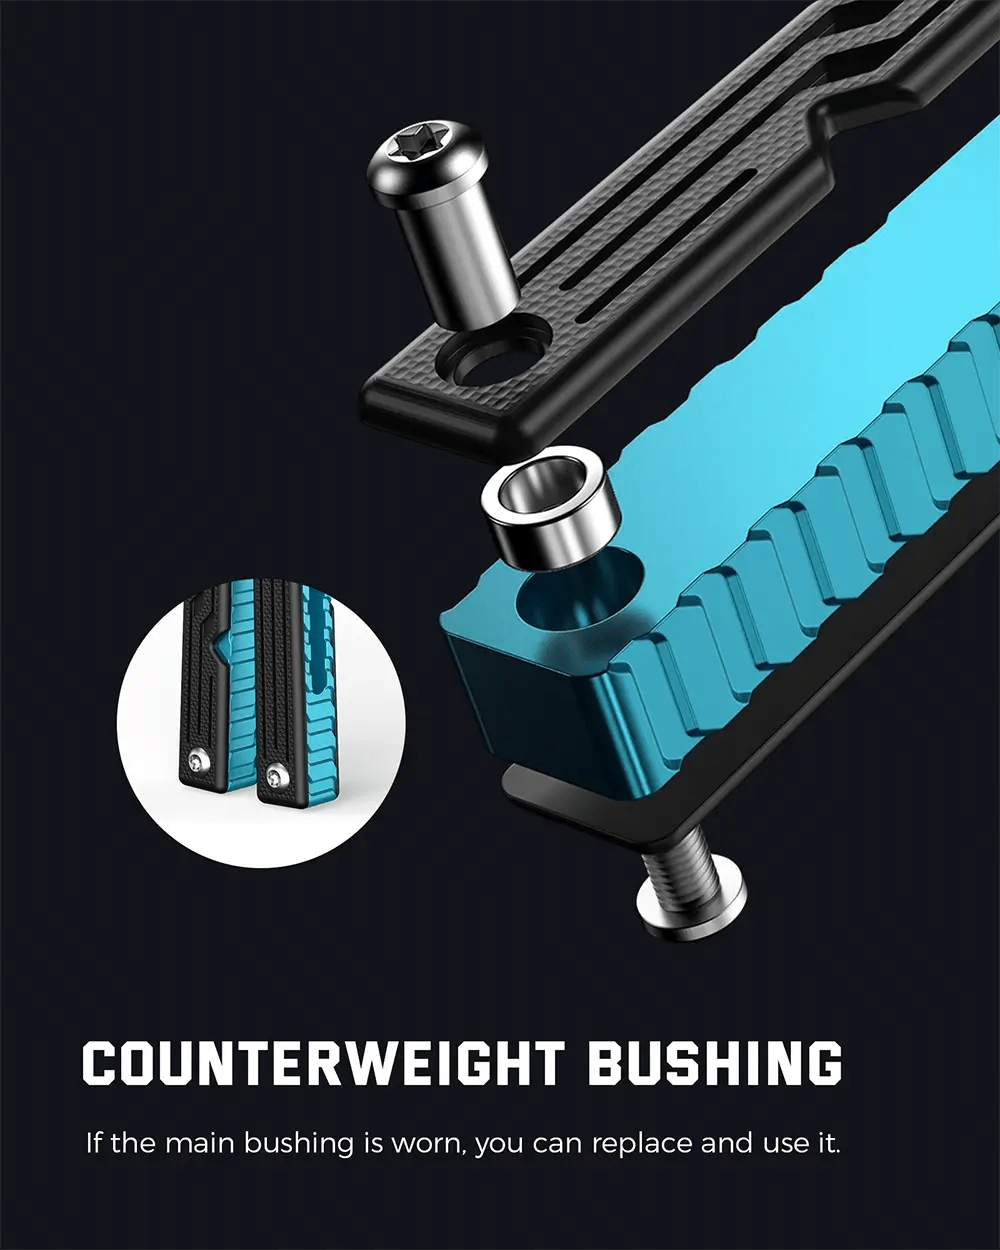 Nabalis Trident Butterfly Knife Balisong Trainer With 7075 Blue Aluminum and Black  G10 Handles-Counterweight Bushing at  the end of handles